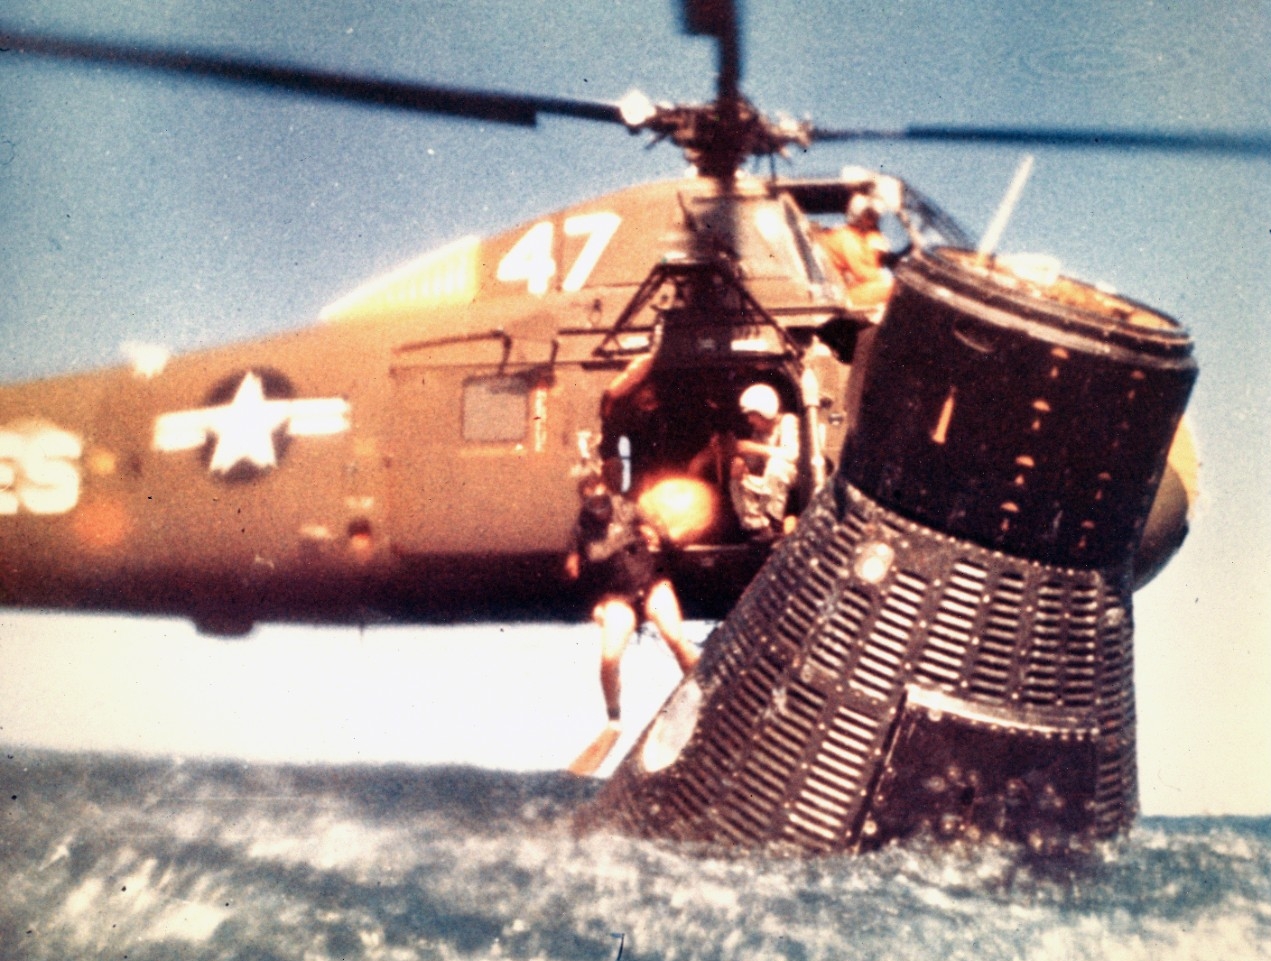 A Navy swimmer dives into the water from Seabat No 47 to work with Cooper within Faith 7 following his splashdown in the Pacific, 16 May 1963. (Naval History and Heritage Command Photograph UA 343.01.02)